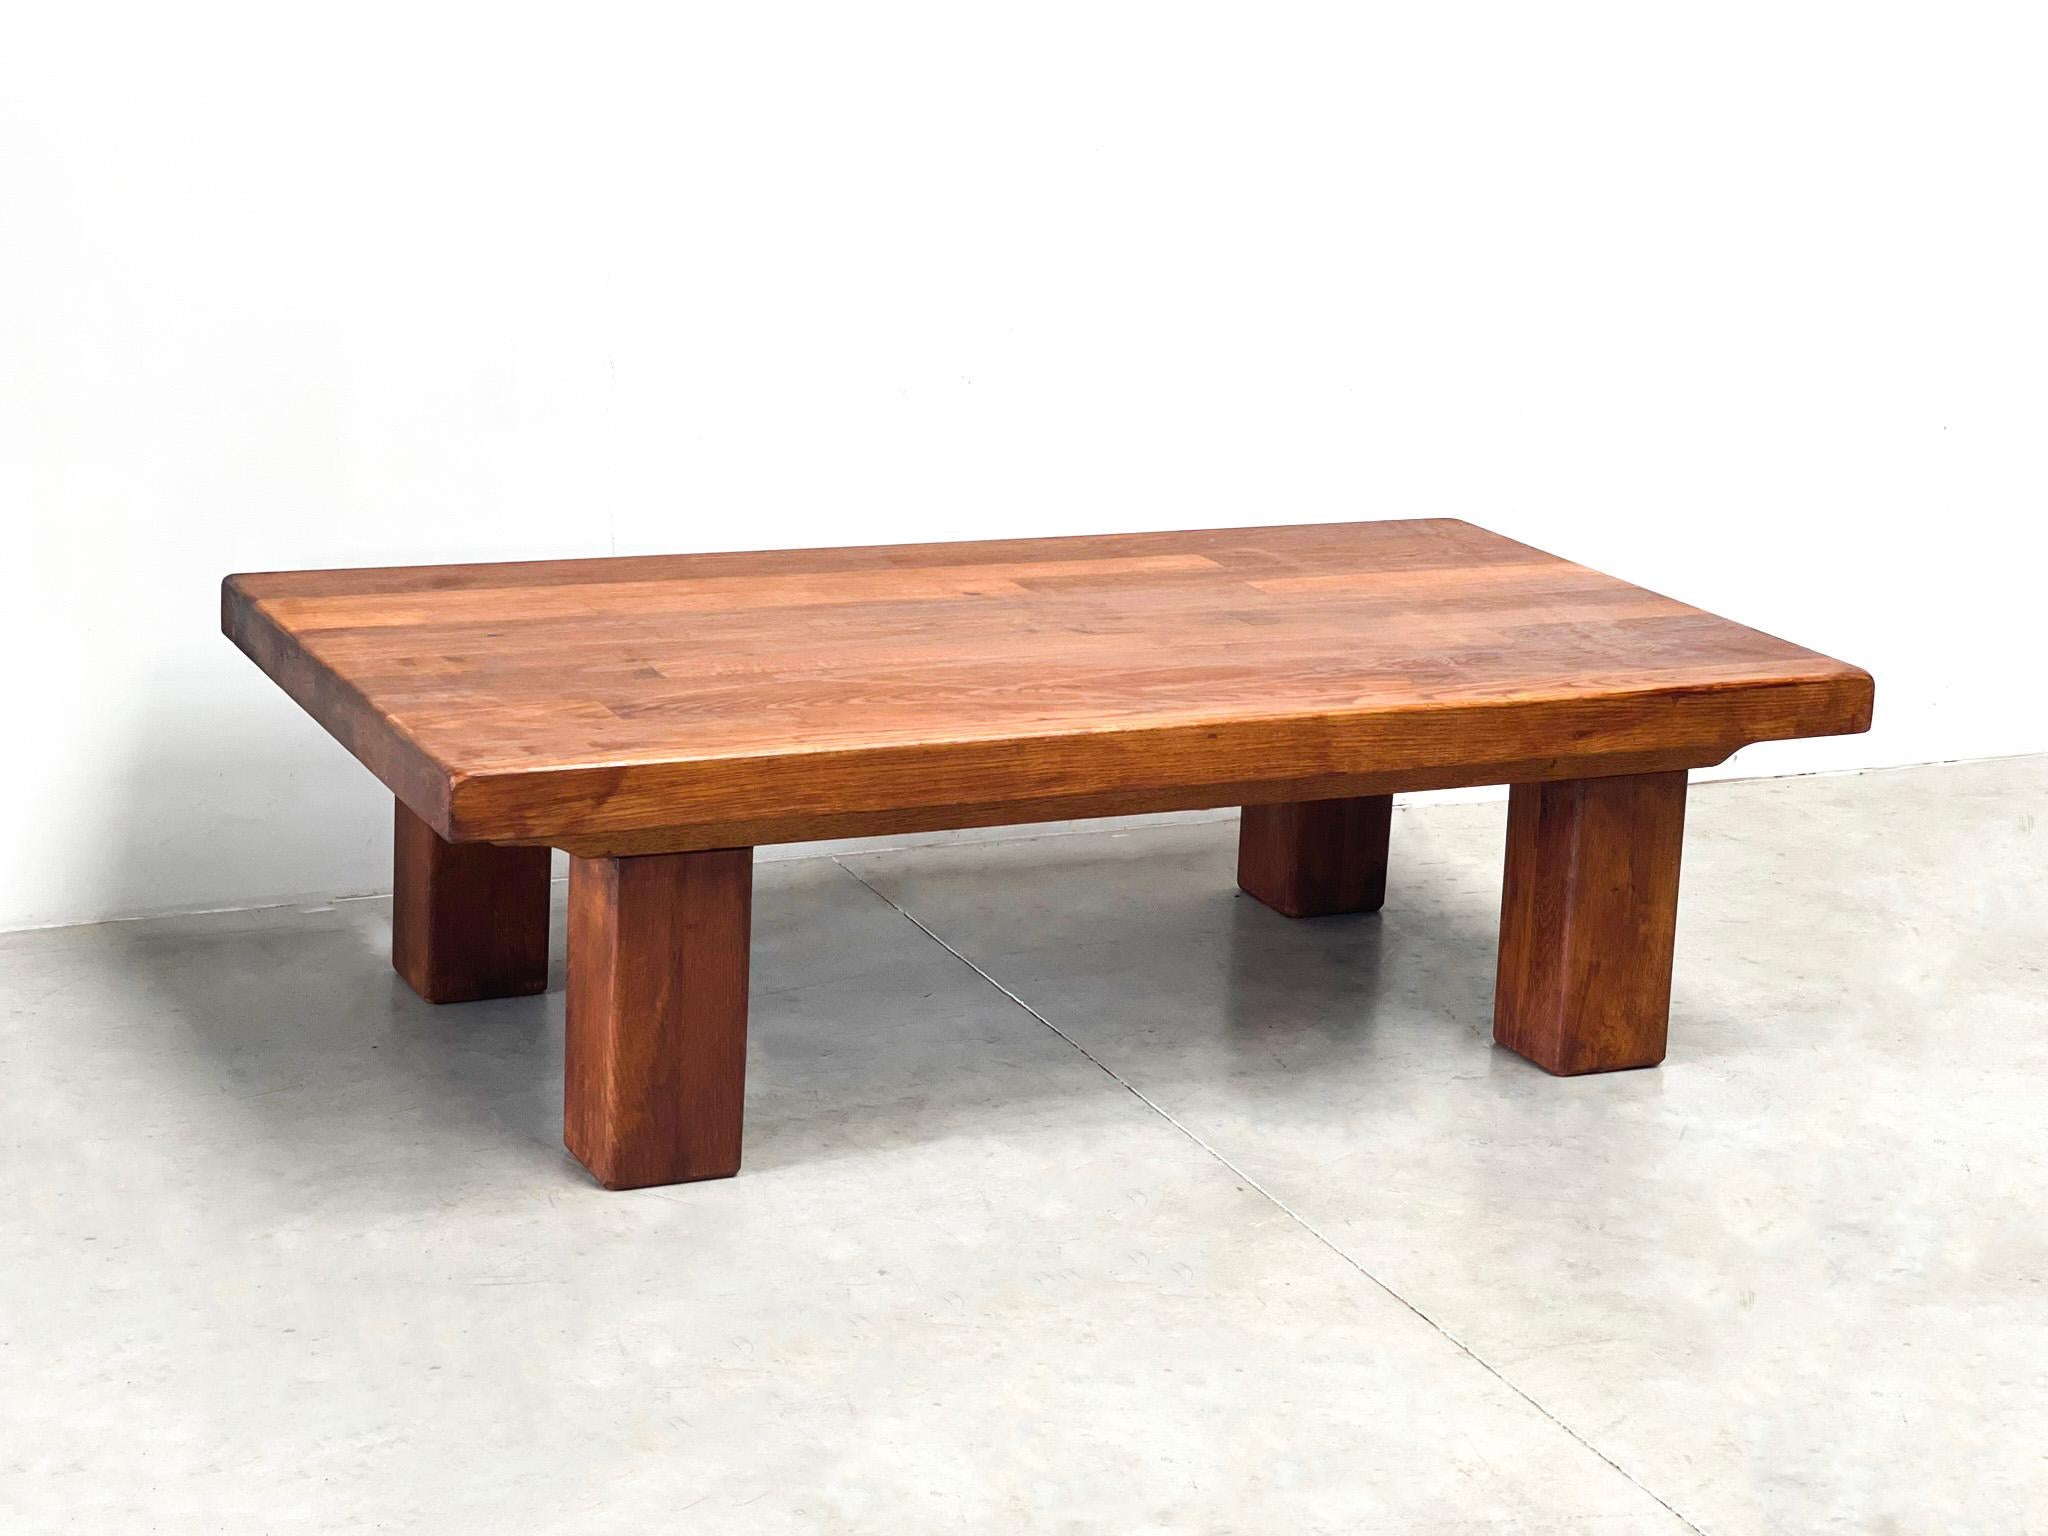 Design in its purest form. A very heavy oak coffee table made in the 80s. The wood has acquired a very nice patina over the years. The table is a very large and heavy piece. This was probably made in Germany. 

 

 

Measurements: 

150cm